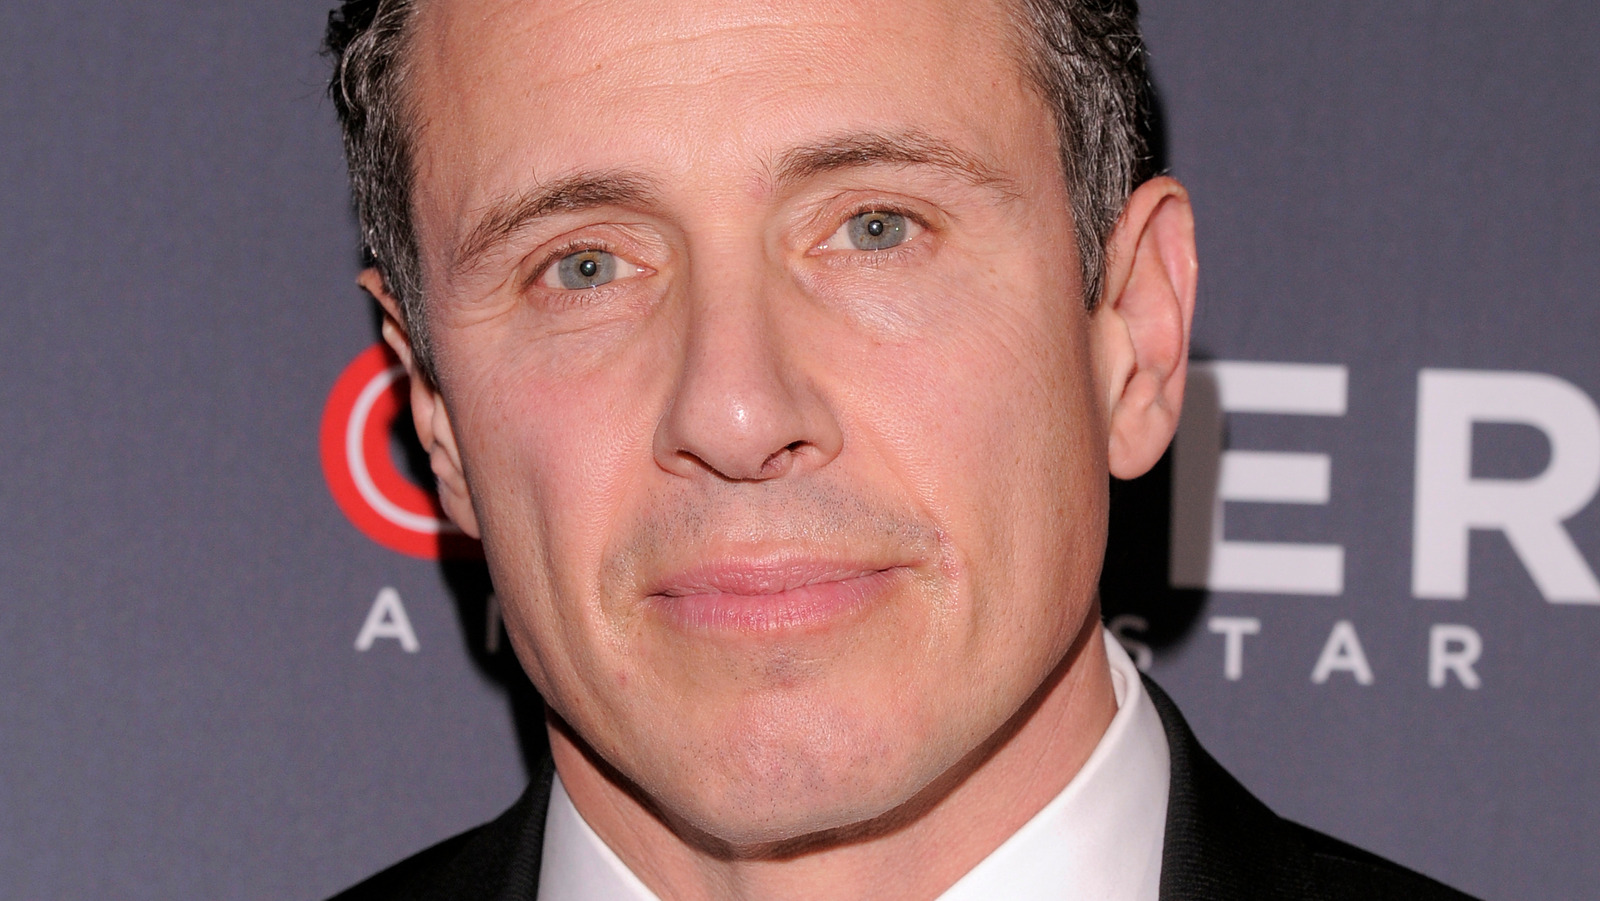 The Real Reason Chris Cuomo Could Be Fired From Cnn